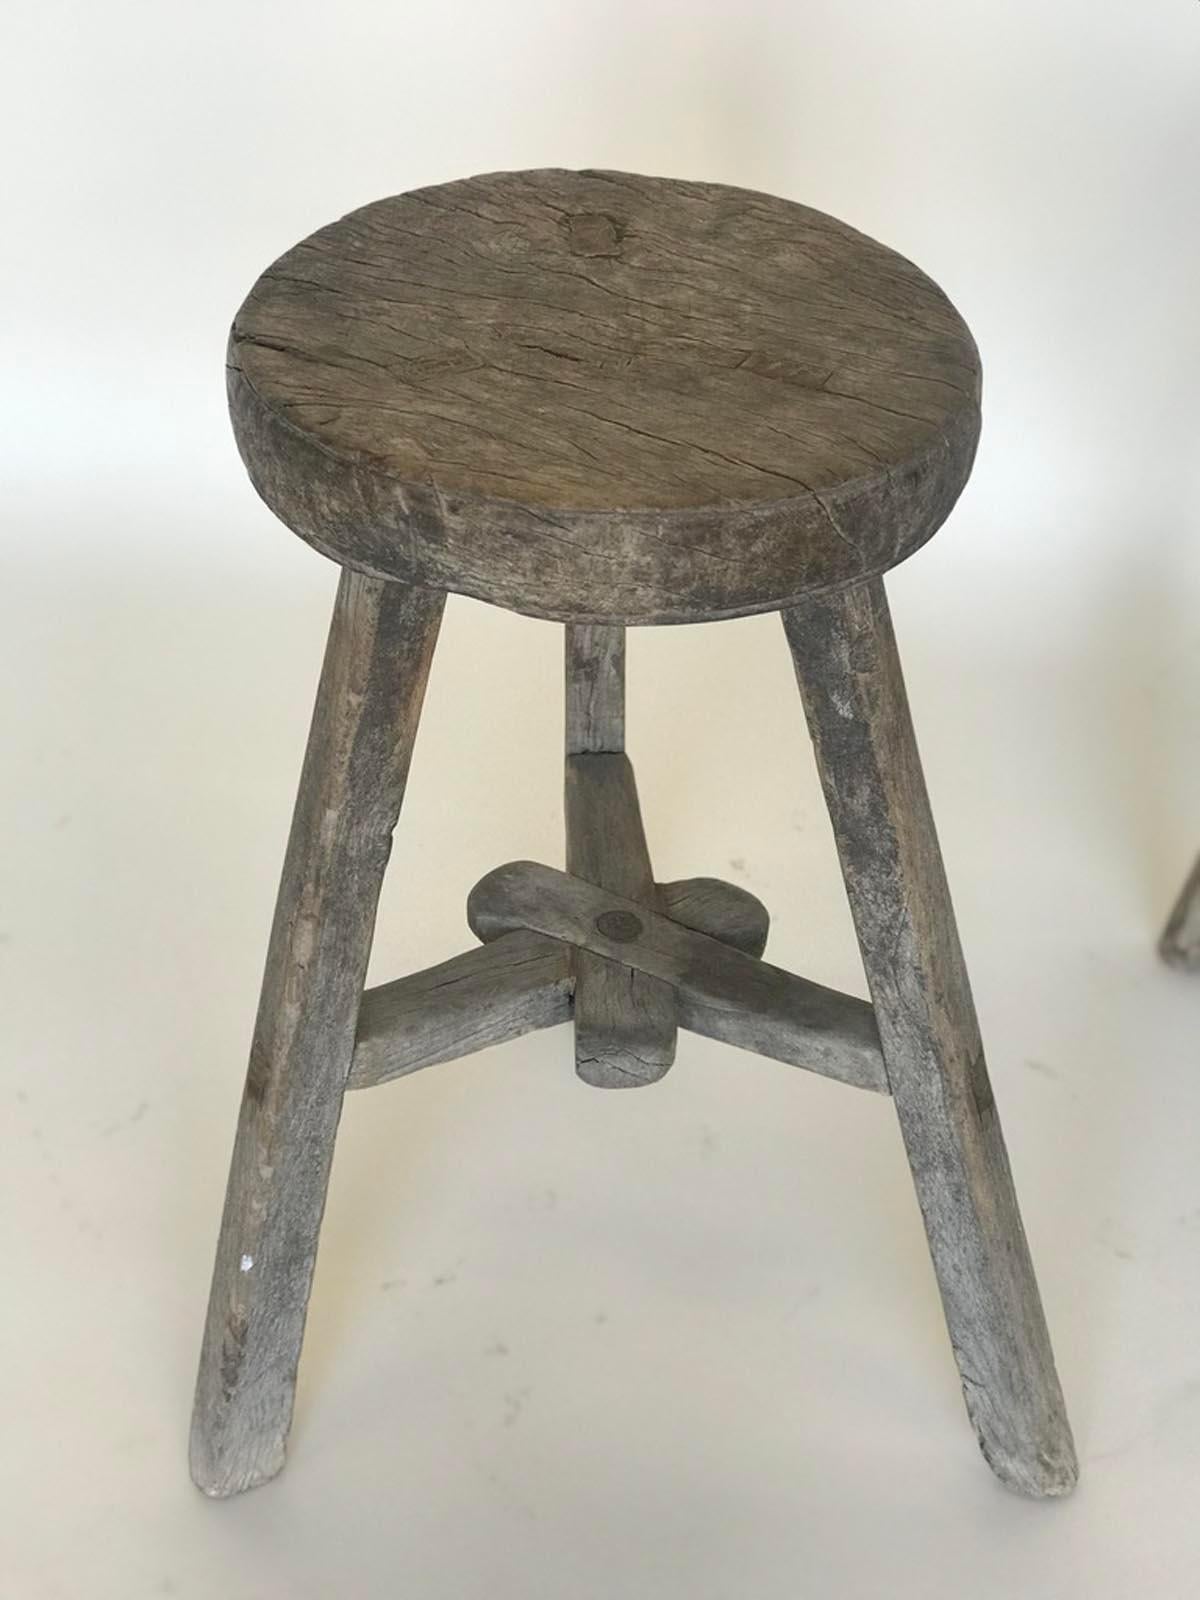 Three vintage elm stools with different configuration on stretchers. Lovely weathered, smooth patina on wood. Mortise and tenon construction. Great for extra seating, a small side table or as a plant stand.
Sold and priced separately.
Measures: